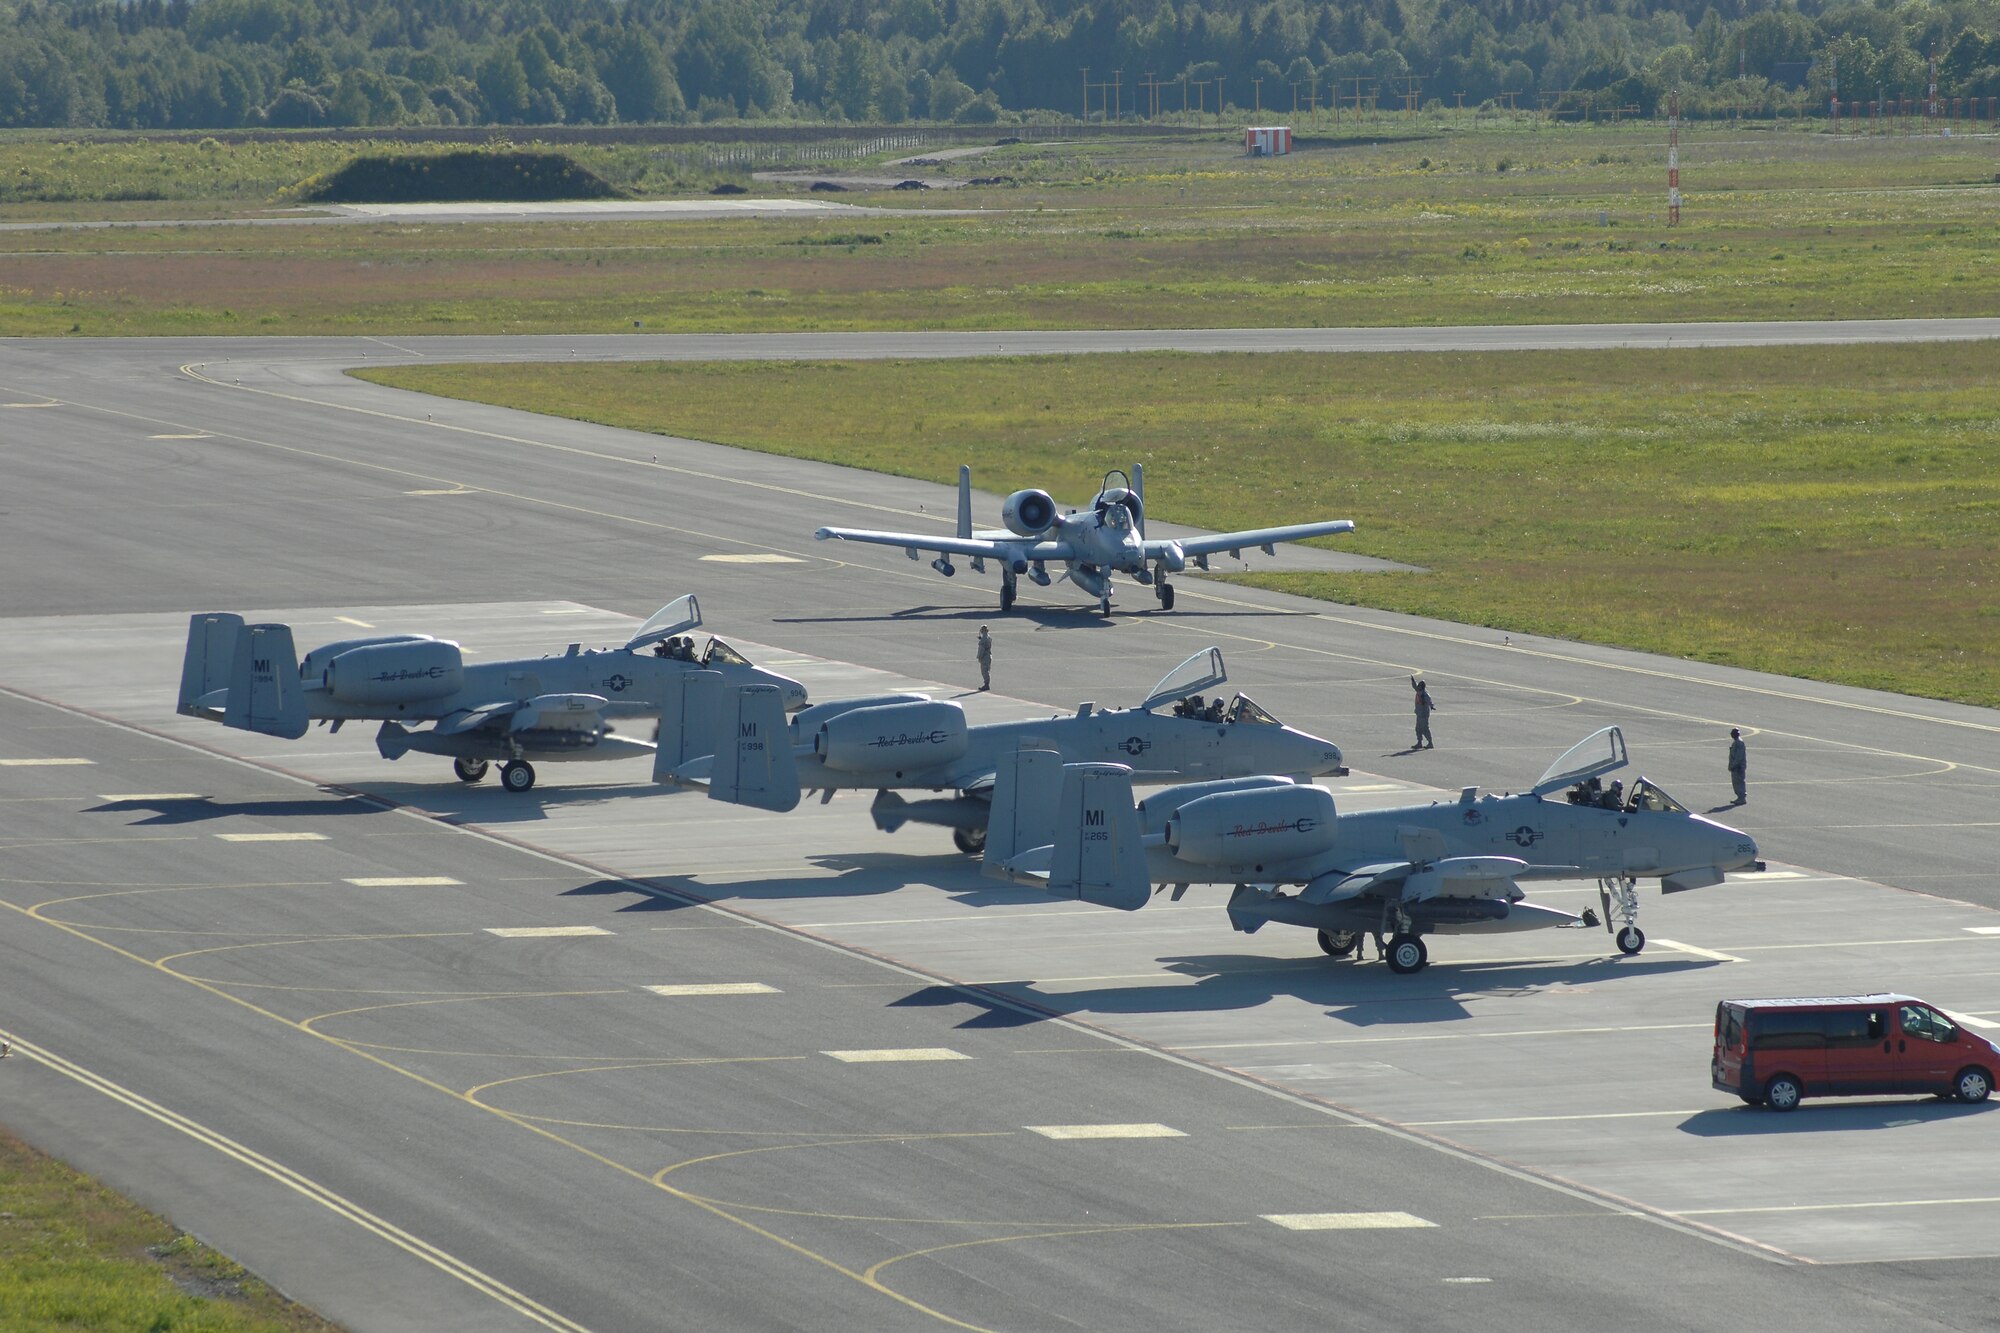 The final U.S. Air Force A-10 Thunderbolt II aircraft of a four-ship formation taxies in at Amari Air Base, Estonia, June 8, 2012. The aircraft, flown by the 107th Fighter Squadron, Michigan Air National Guard, are believed to be the first A-10s to ever land in Estonia. The aircraft and their Airmen were in Estonia to participate in Saber Strike 2012, a multi-national exercise based in Estonia and Latvia. (National Guard photo by SSgt. Rachel Barton)